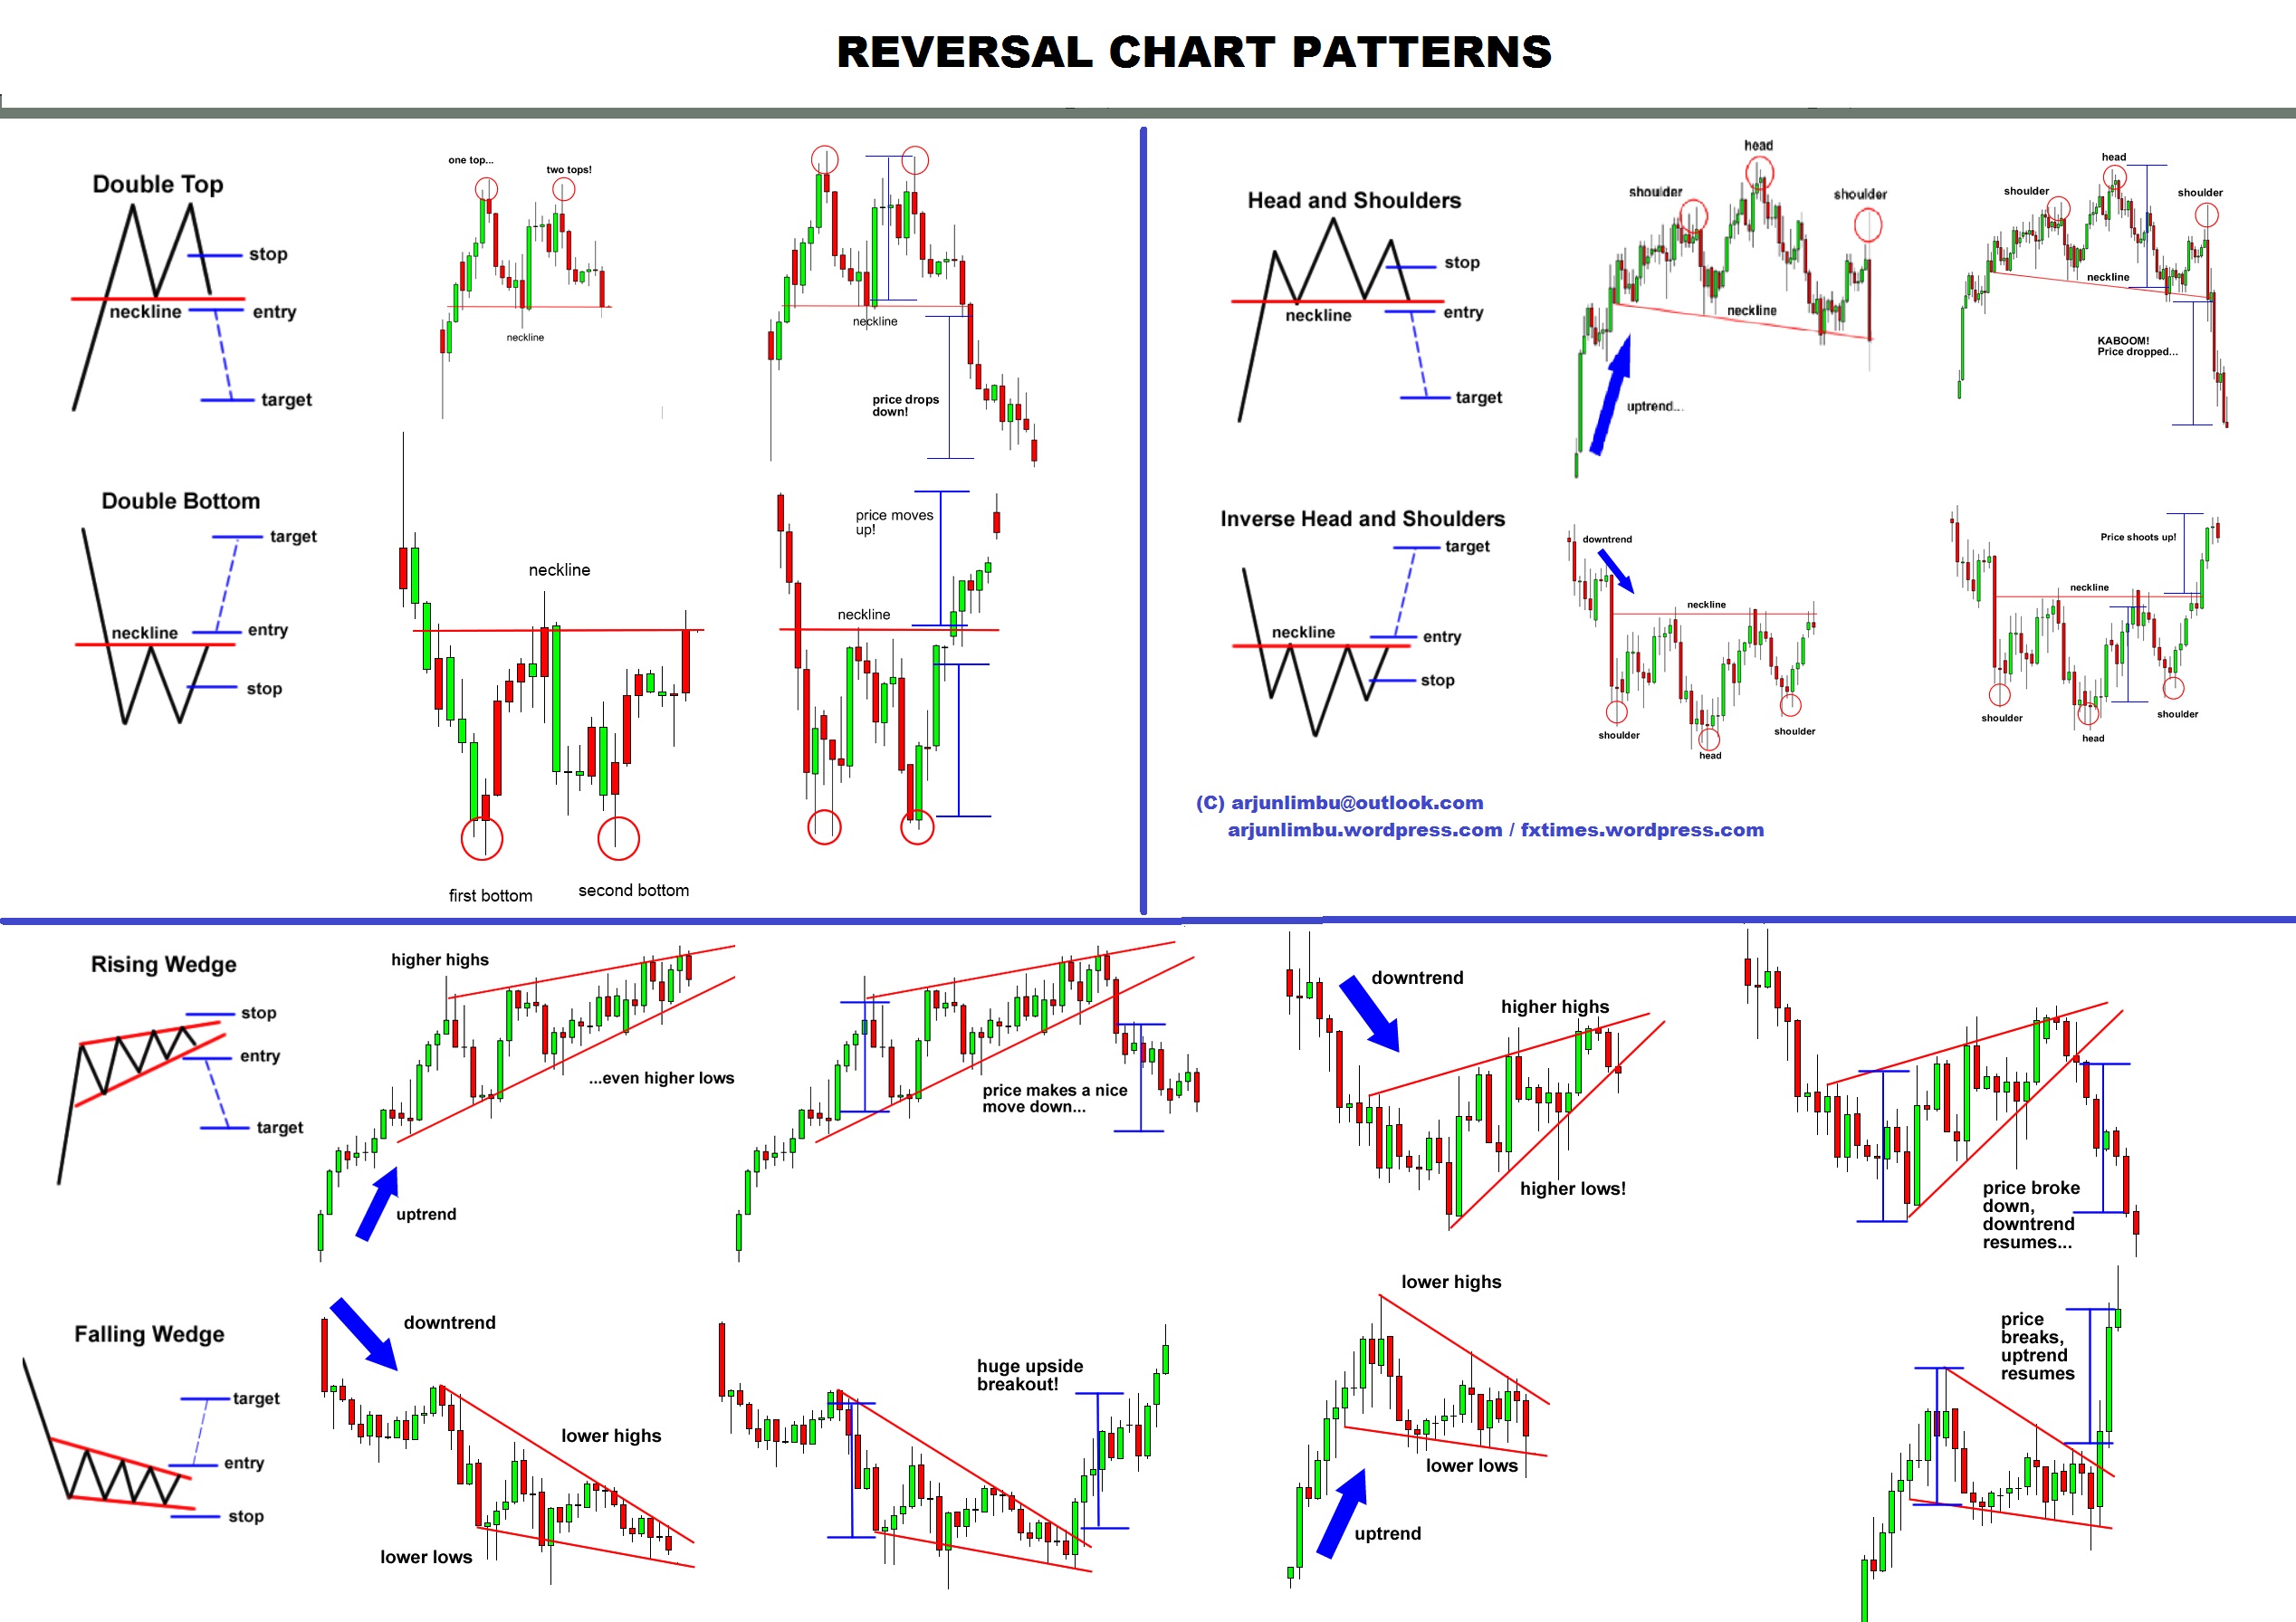 Candlestick Crypto Charts